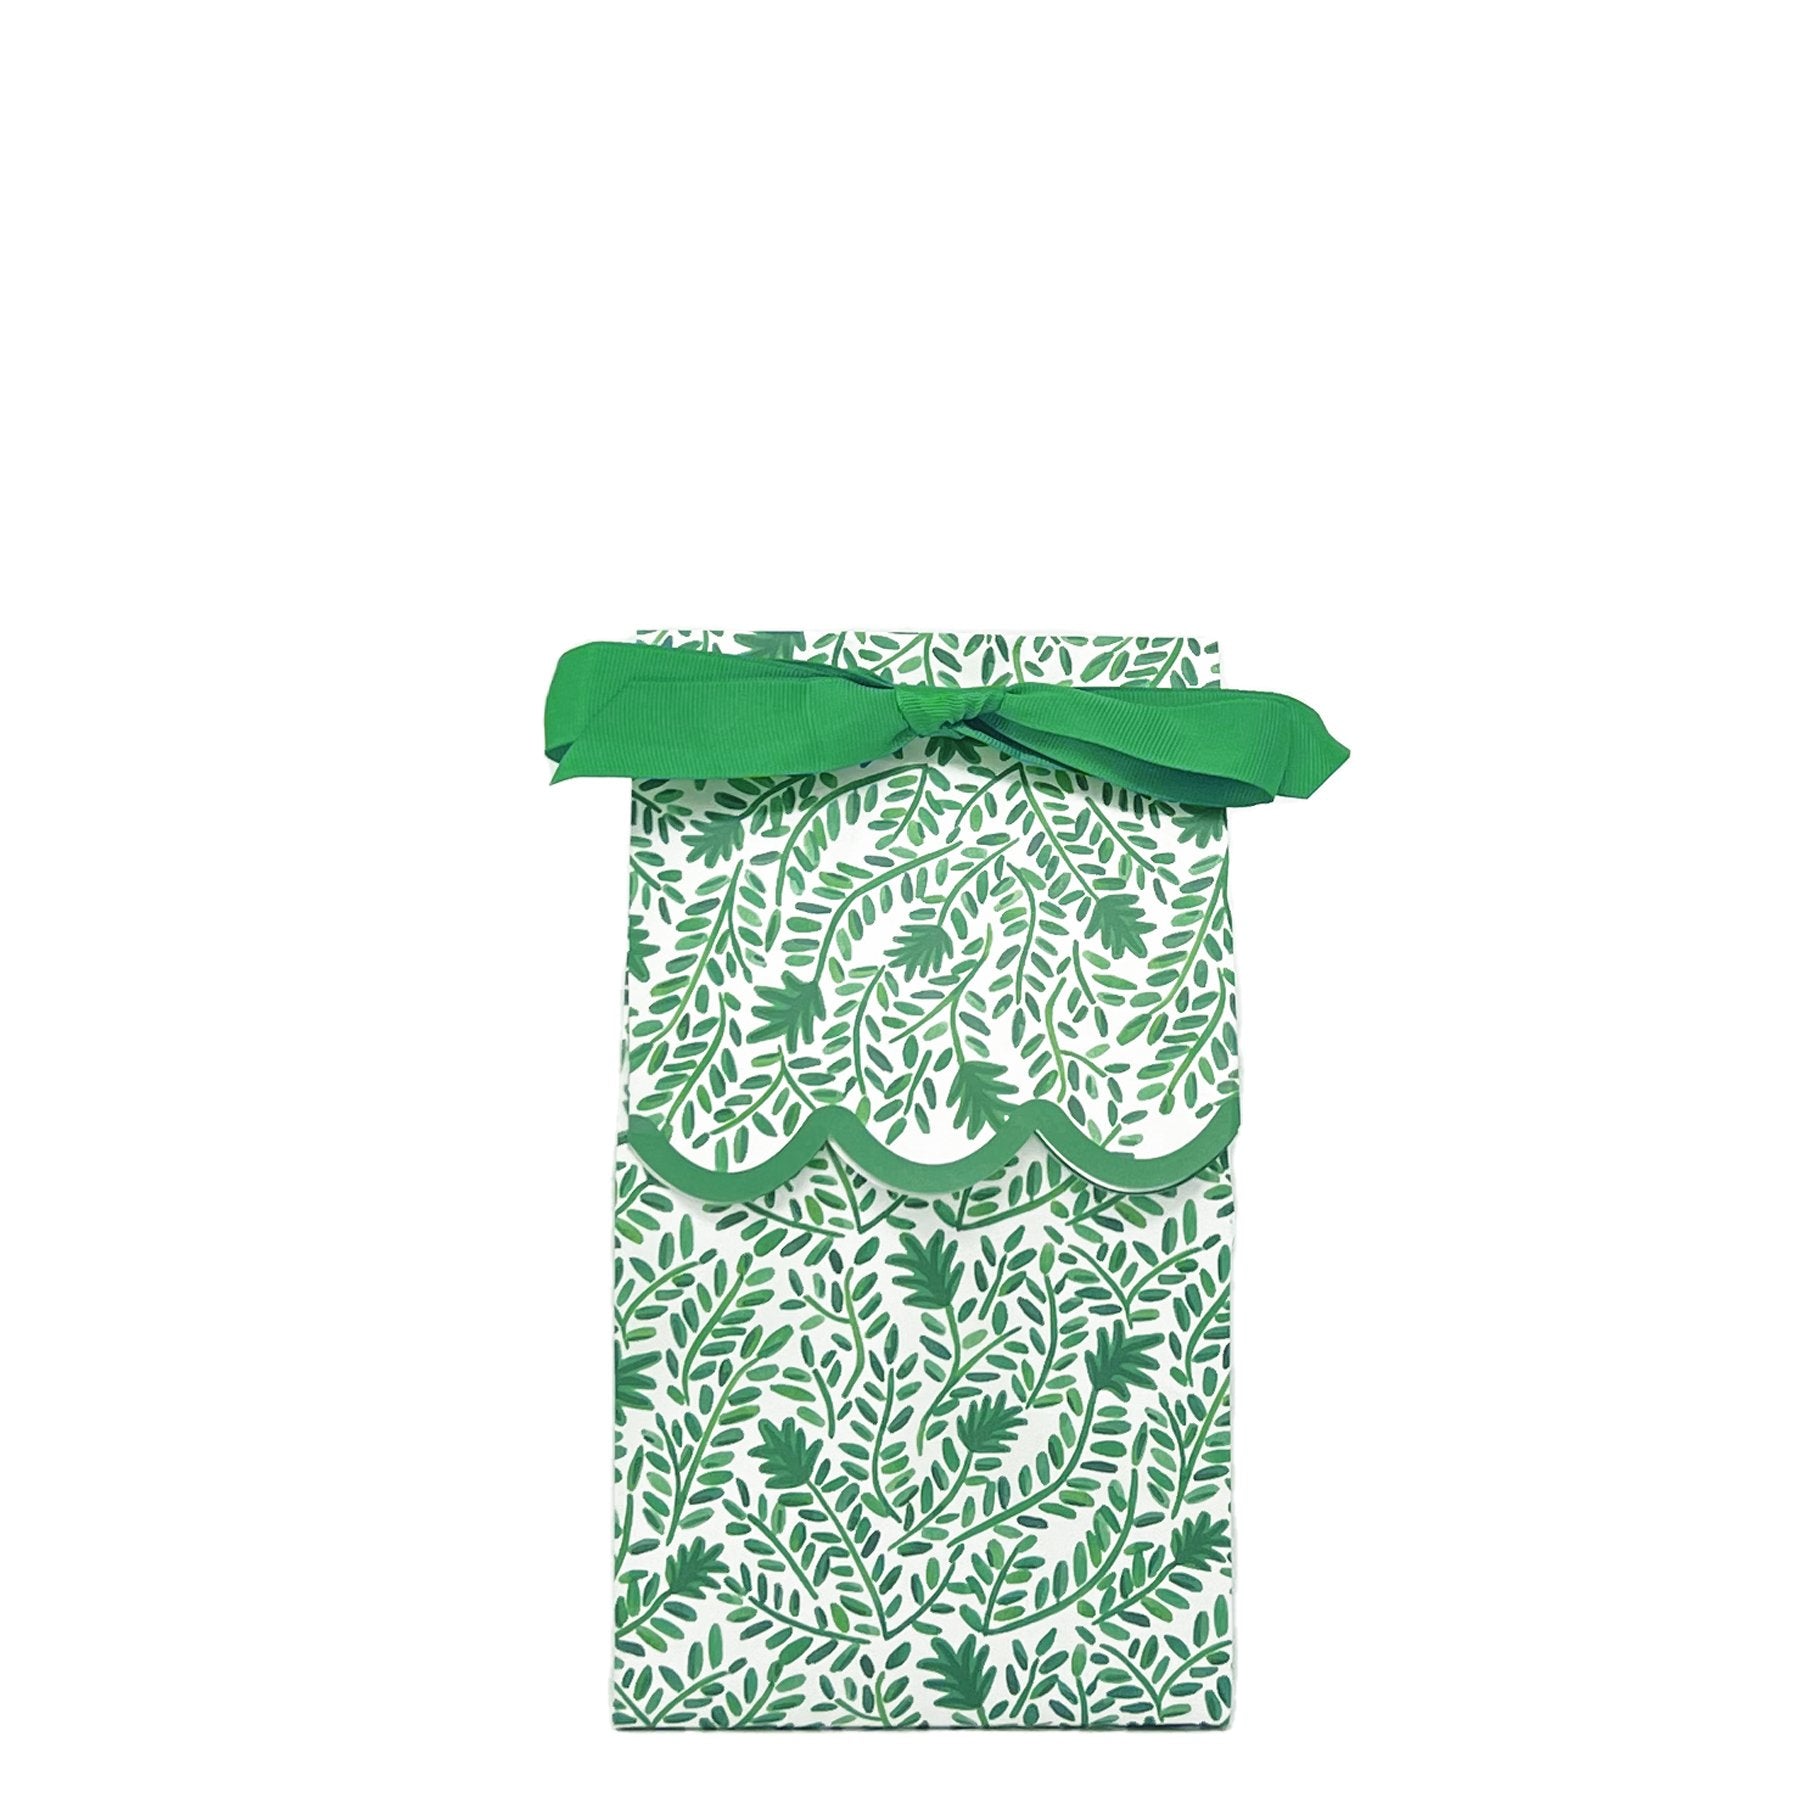 Paper wine bag featuring a green and white vine pattern tied as a gift bag with a green bow